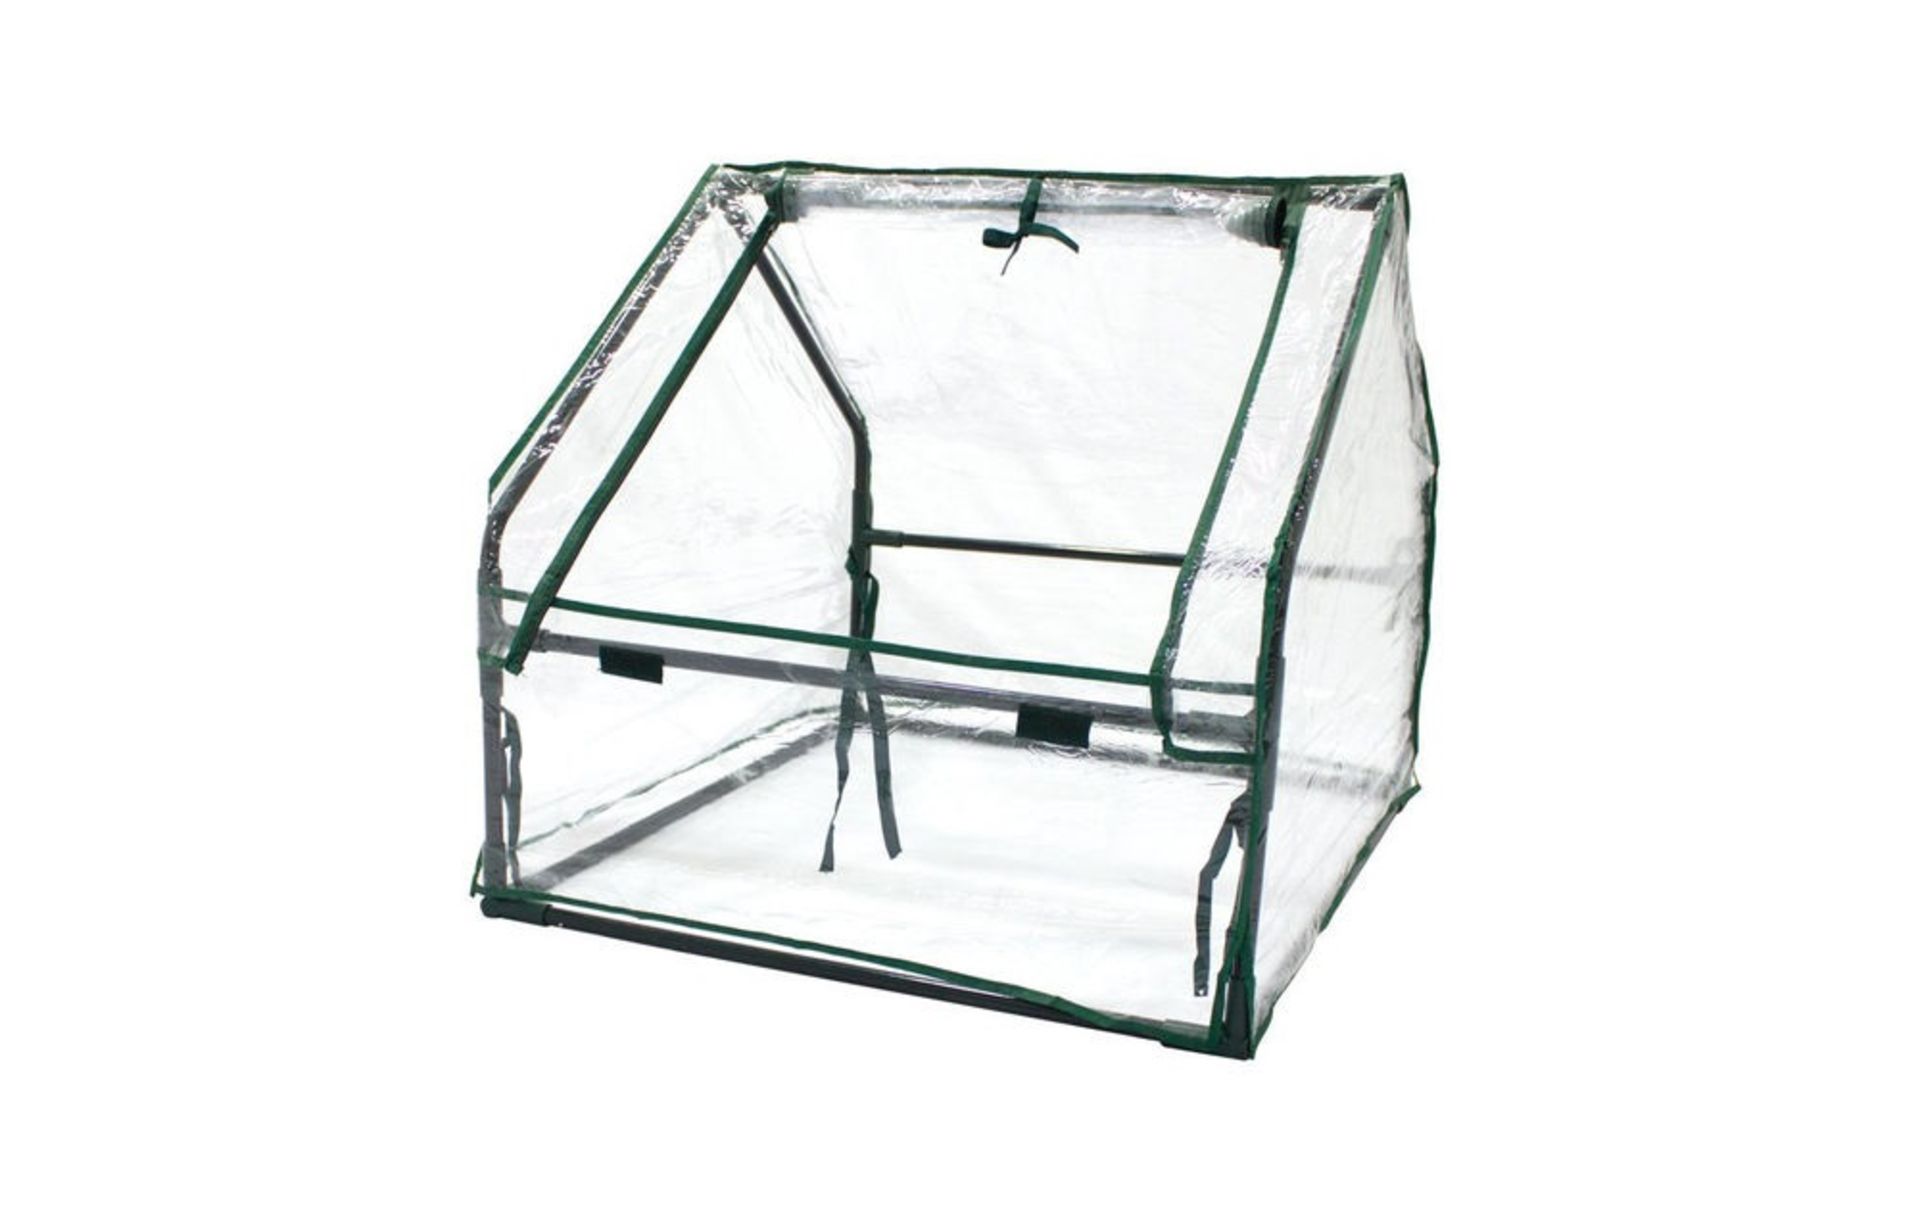 V Brand New Propagation Greenhouse 67x76x60cm With Removable Cover X 2 YOUR BID PRICE TO BE